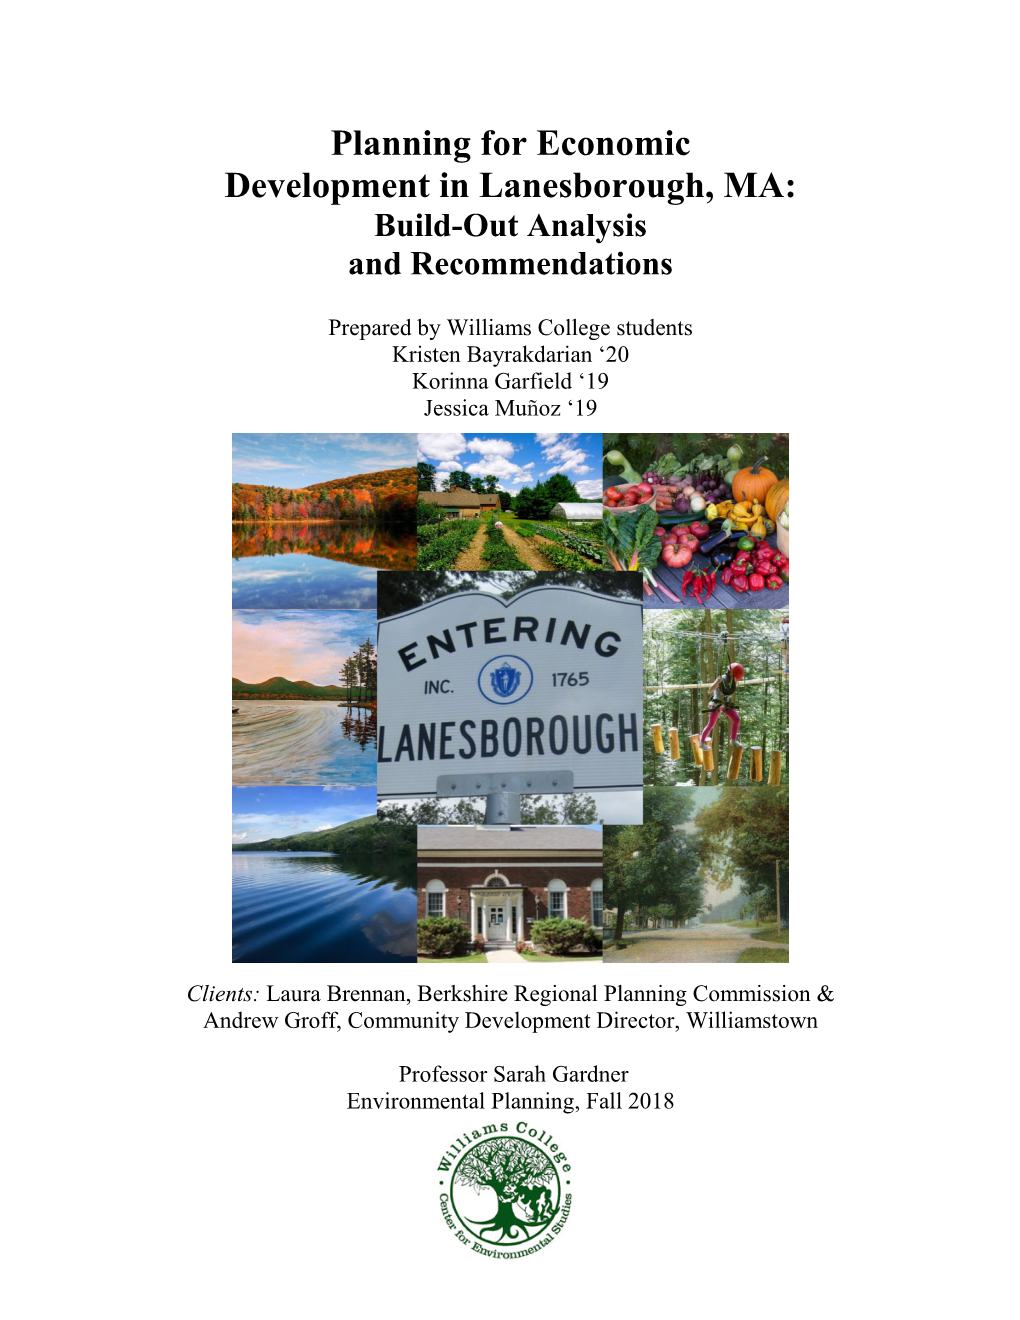 Planning for Economic Development in Lanesborough, MA: Build-Out Analysis and Recommendations